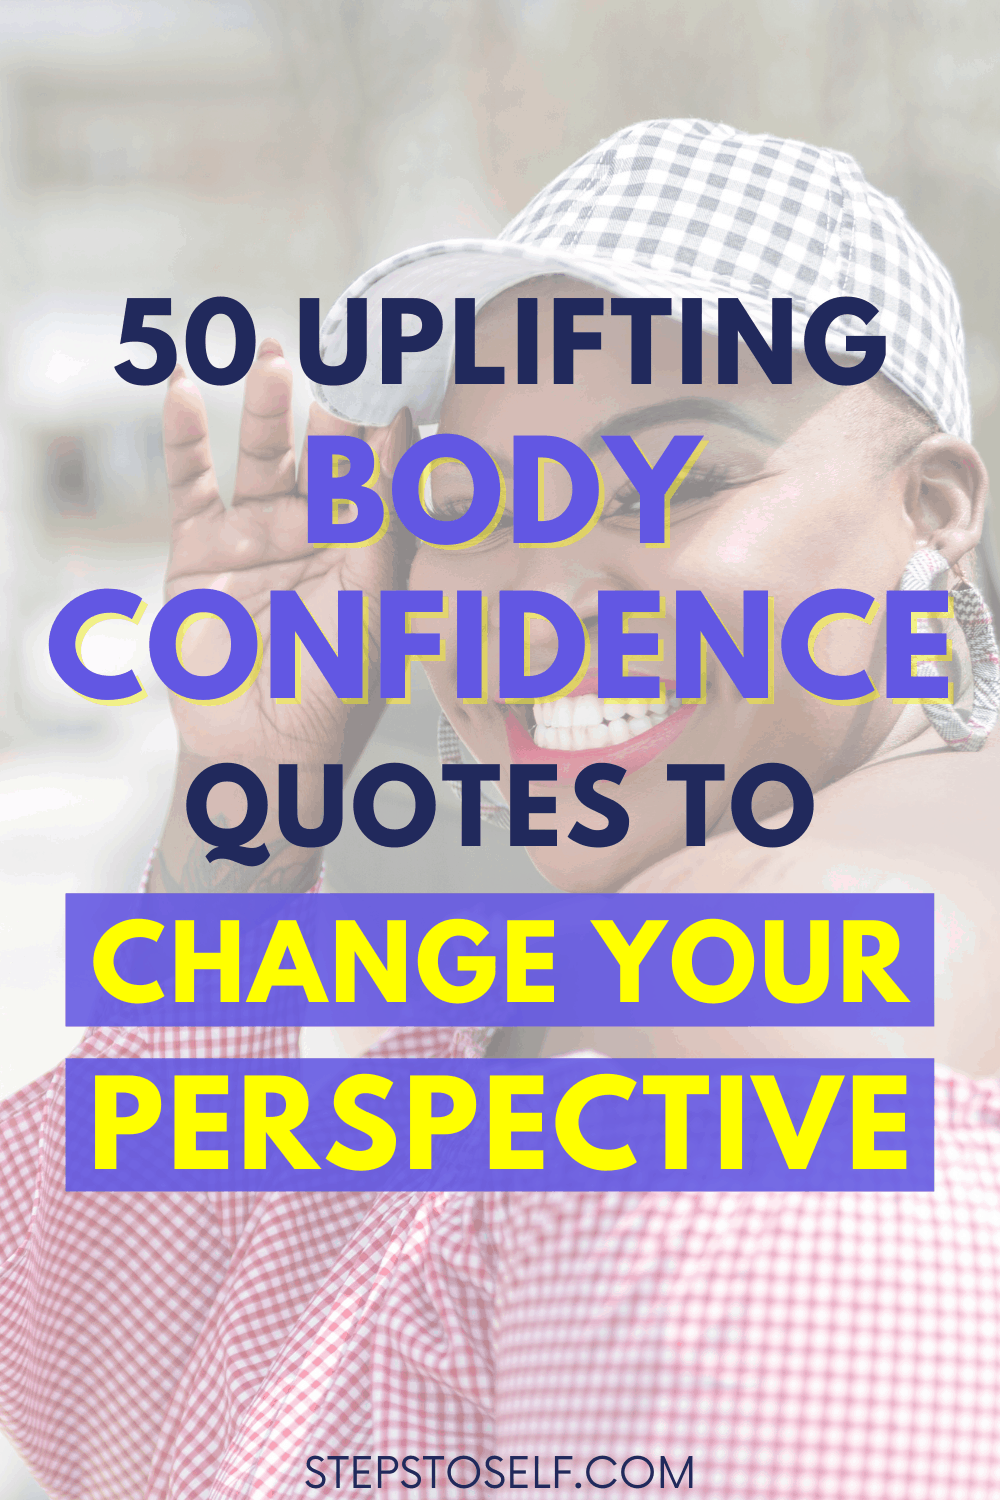 50 Uplifting Body Confidence Quotes to Change Your Perspective